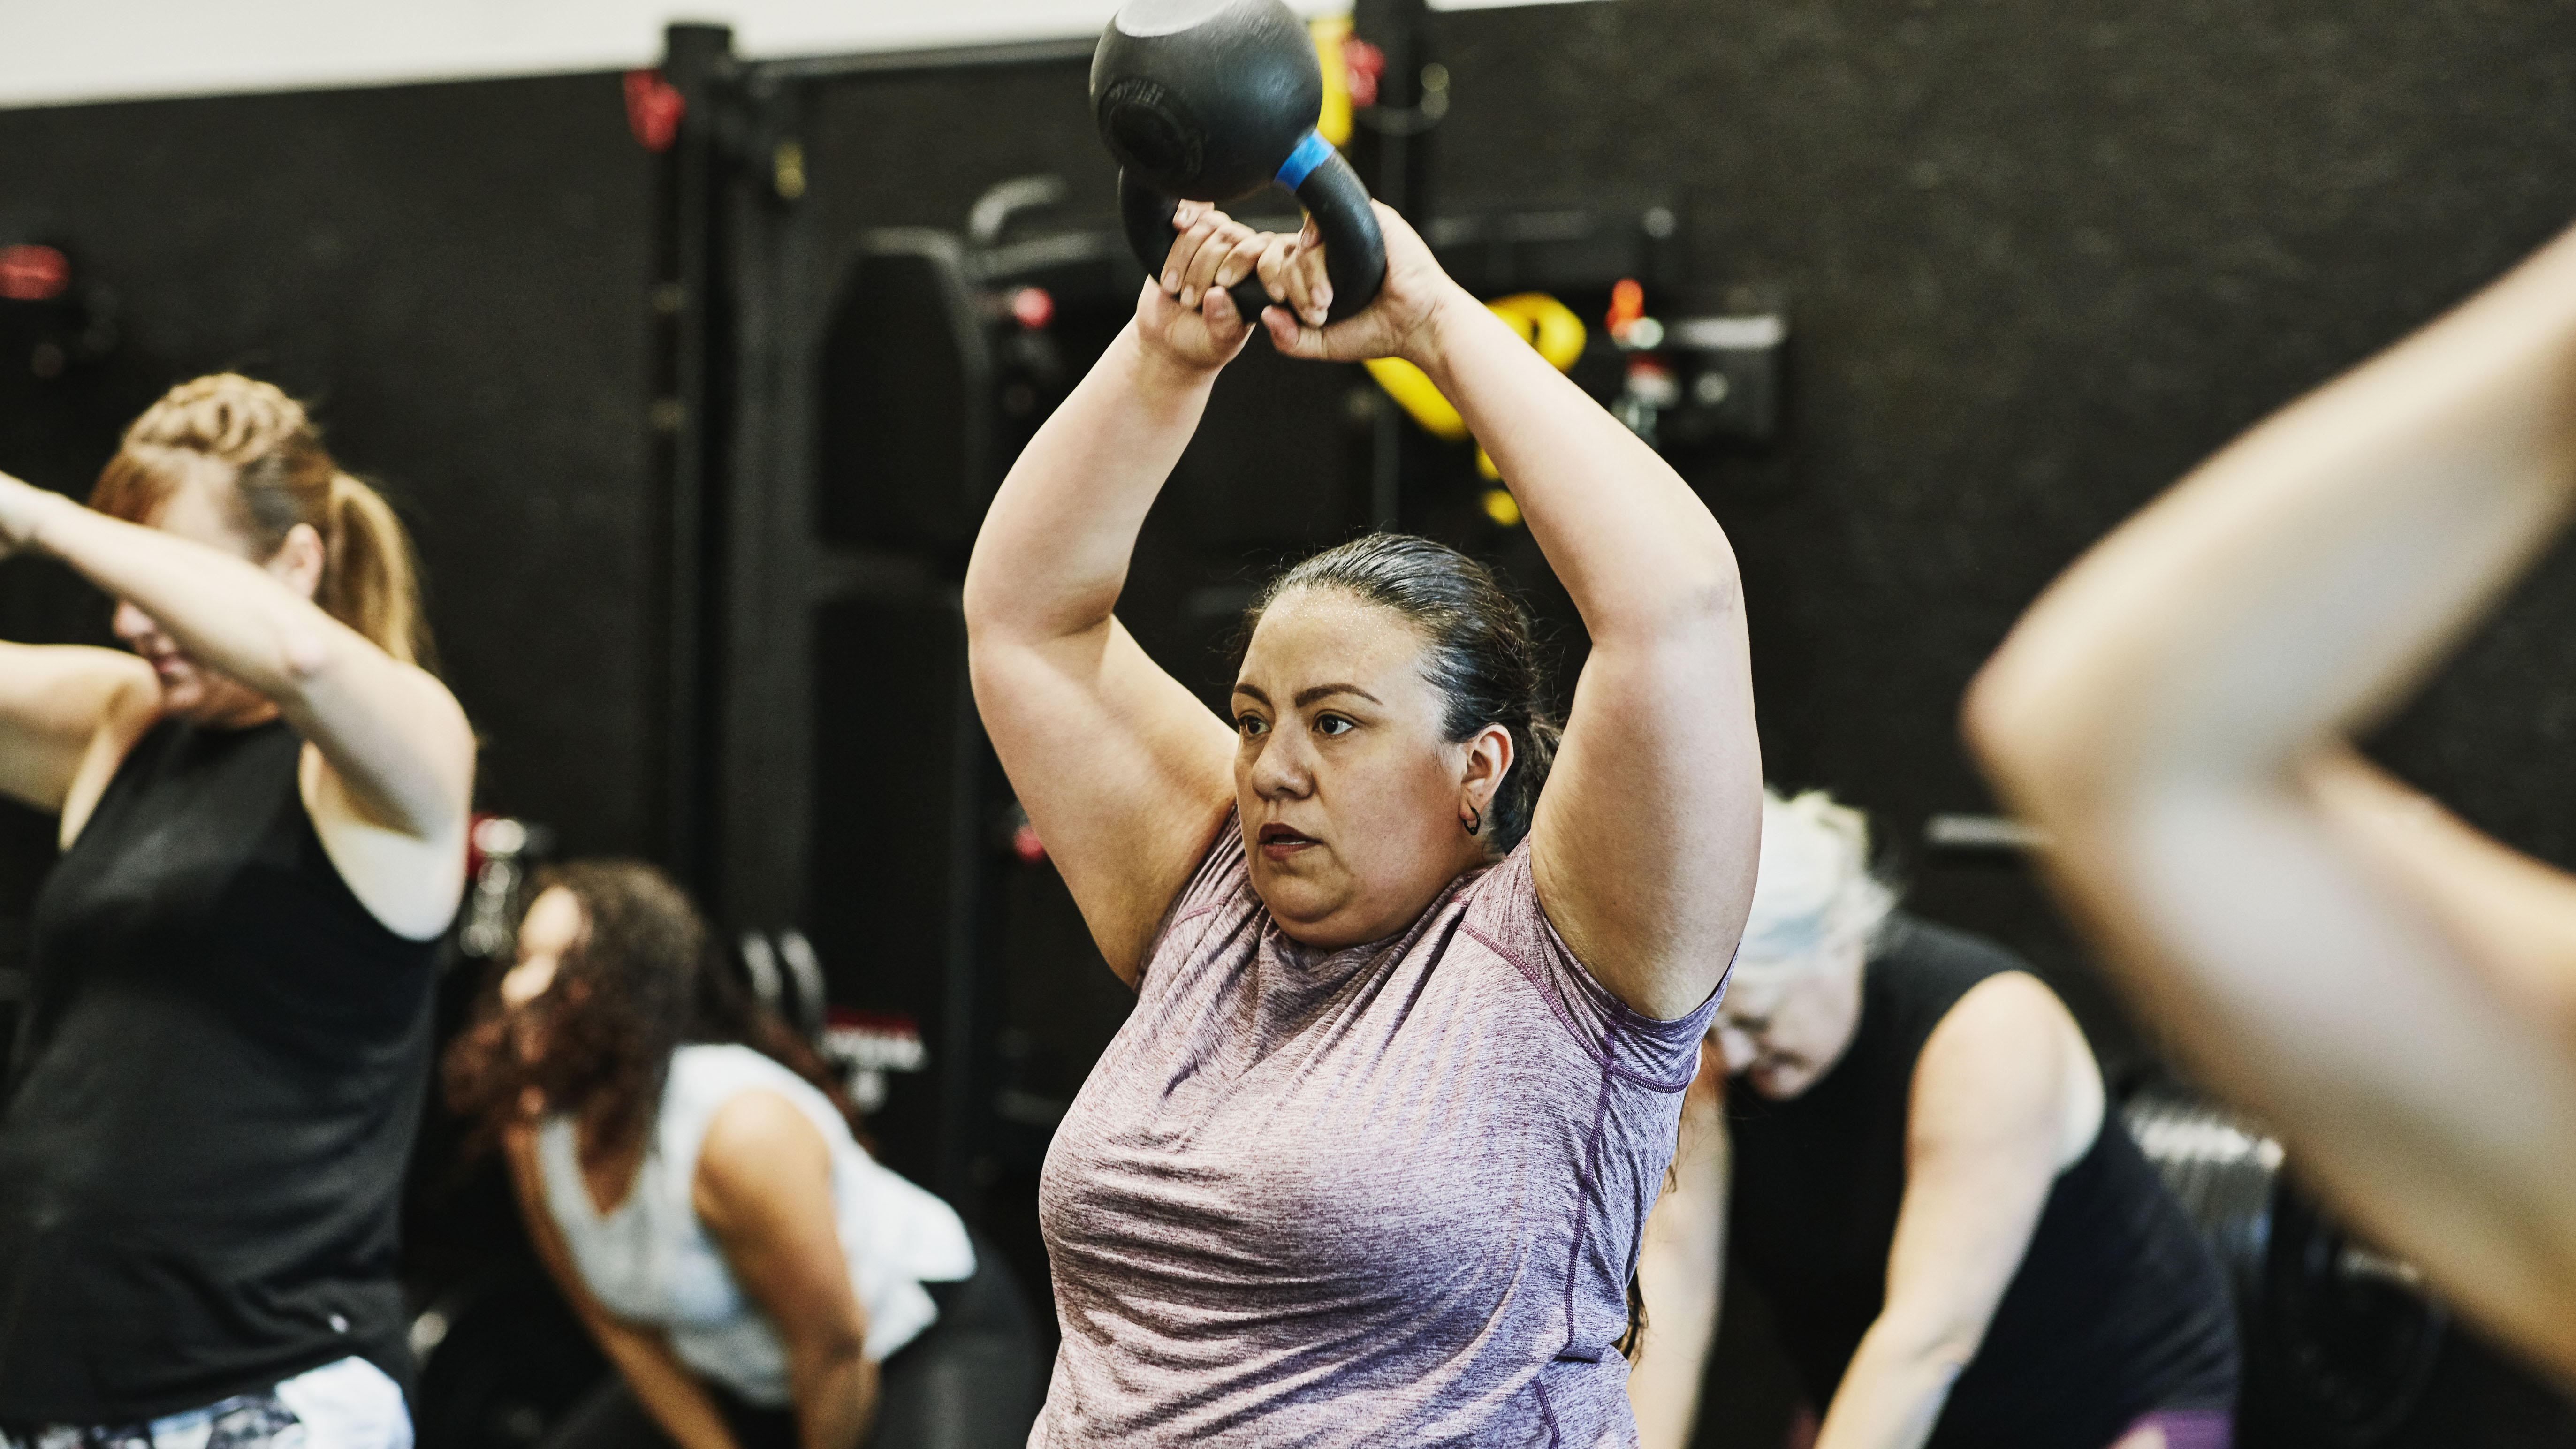 A woman swings a kettlebell in the gym